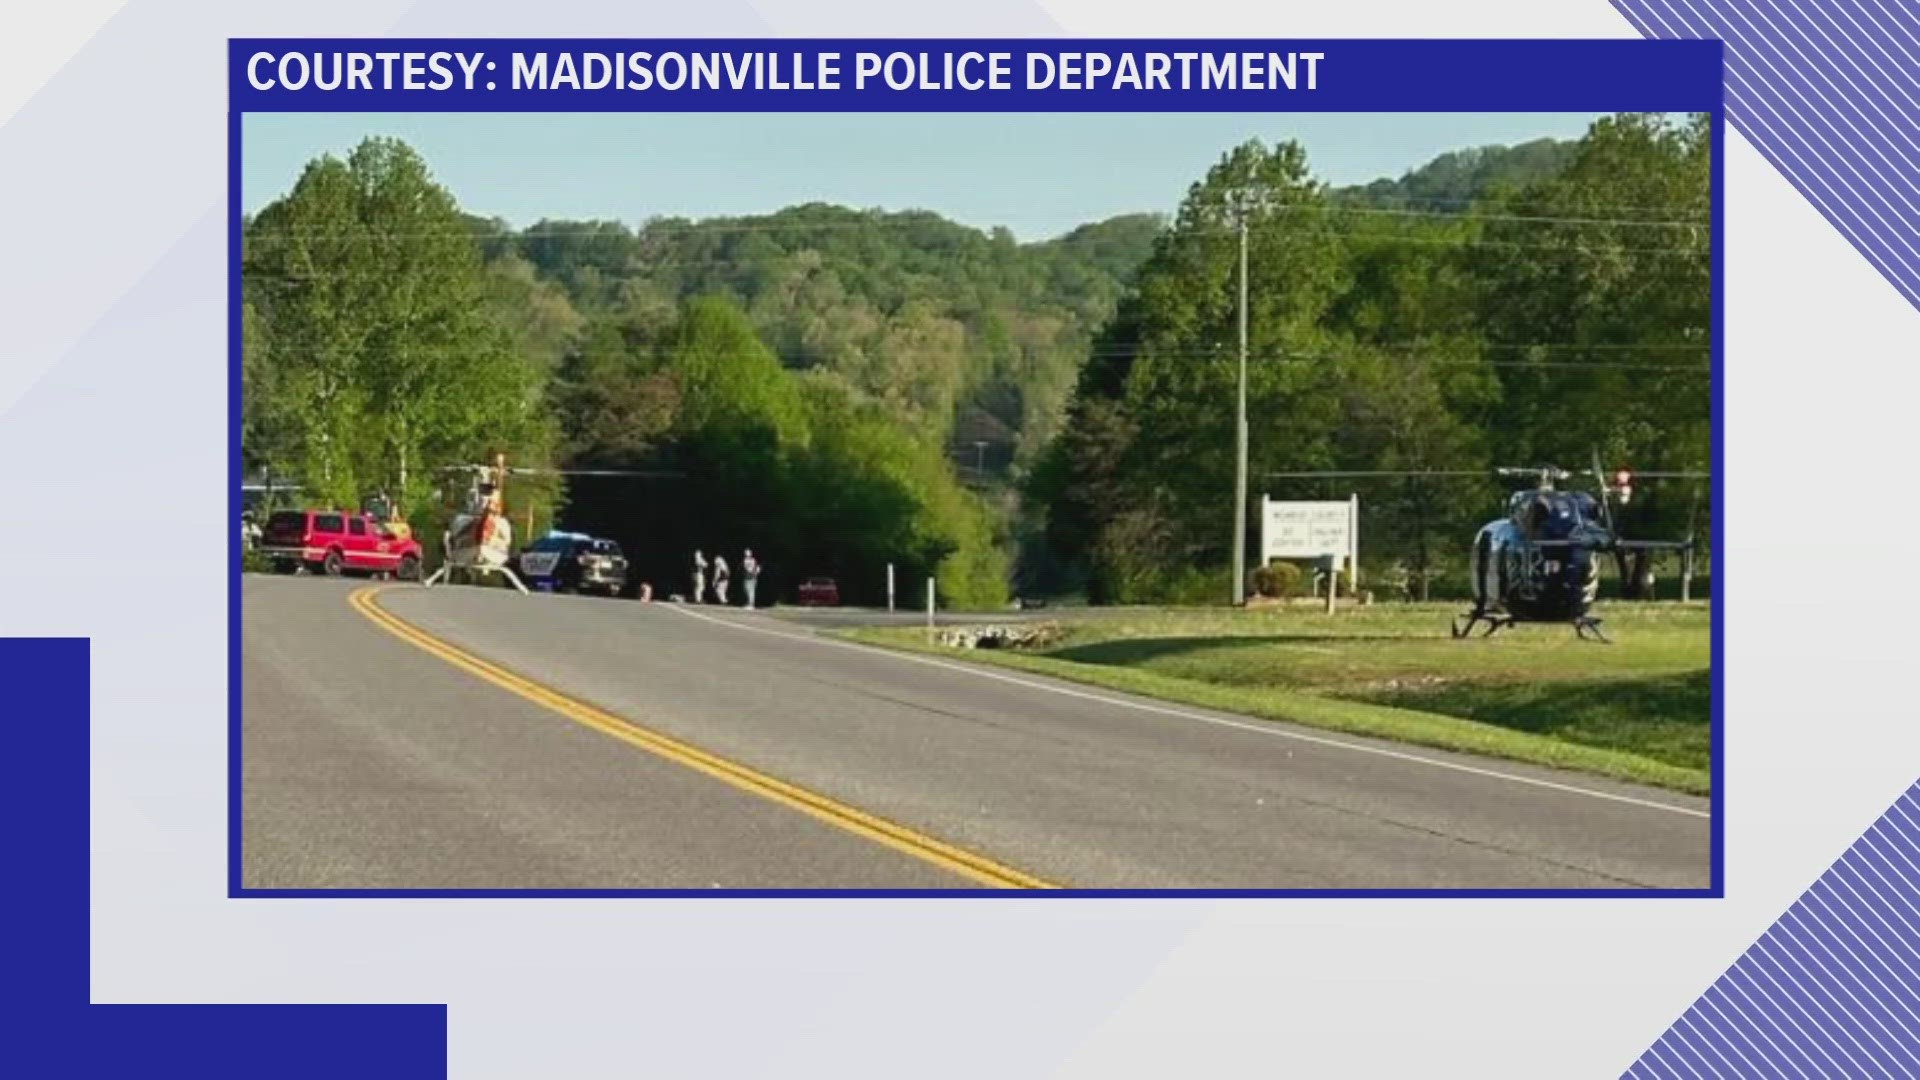 The crash happened Tuesday morning on New Highway 68, according to the Madisonville Police Department.